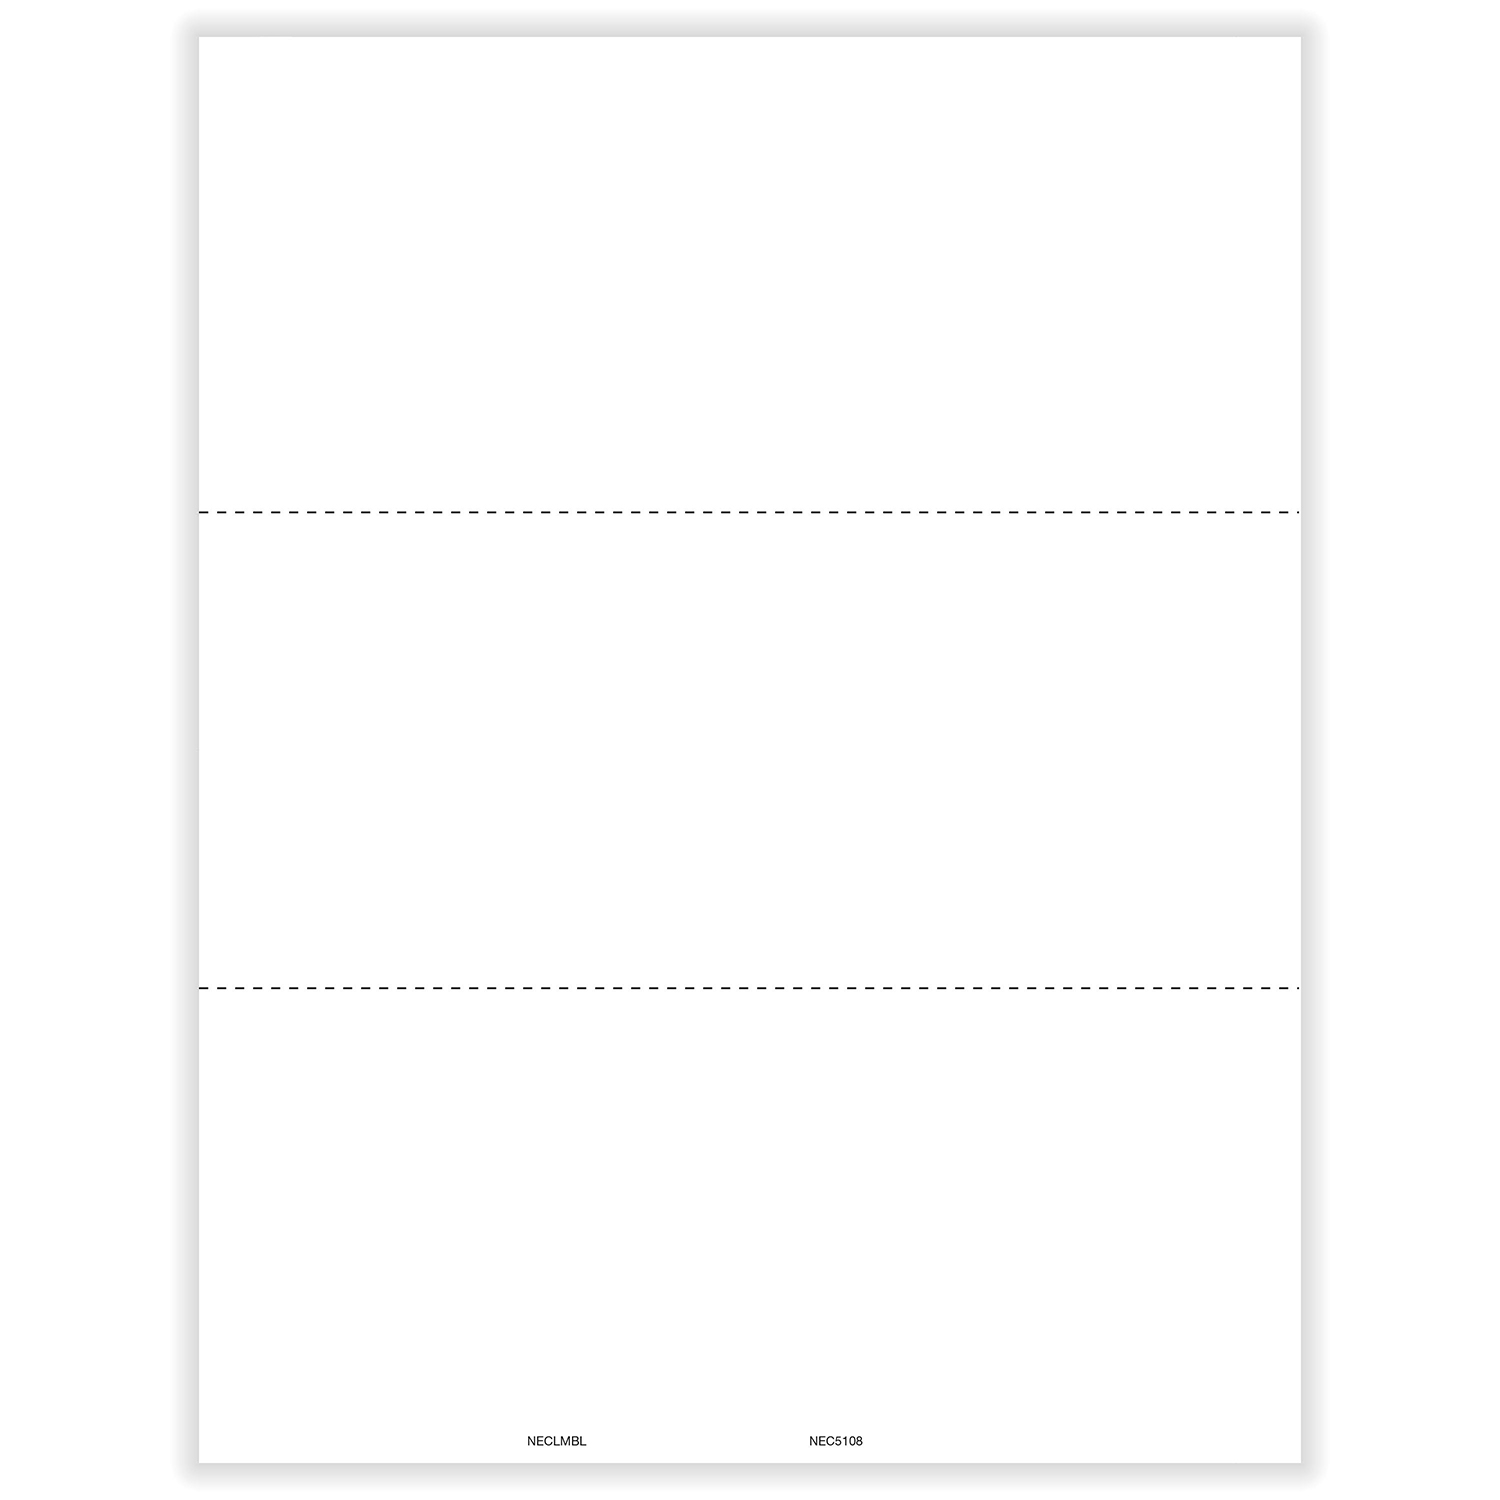 Picture of 1099-NEC Blank, Copy B, 3-Up, w/ Backer Instructions (500 Sheets)